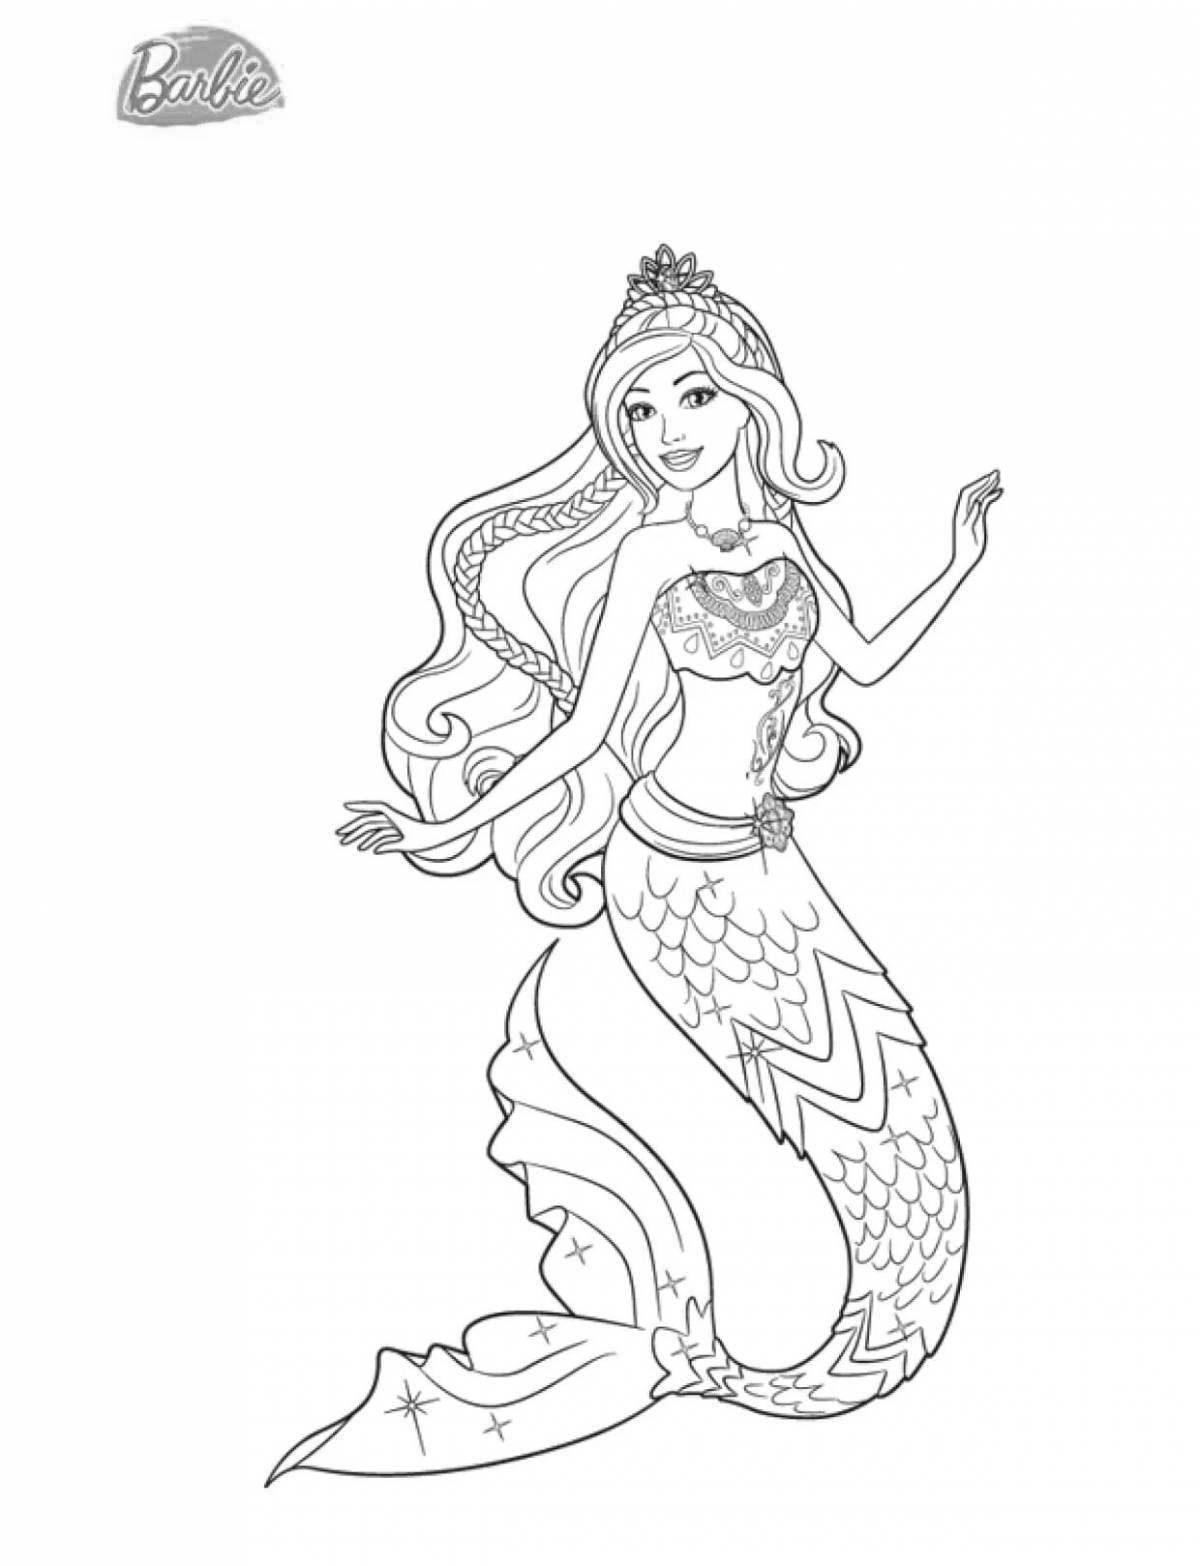 Sublime coloring page barbie doll mermaid